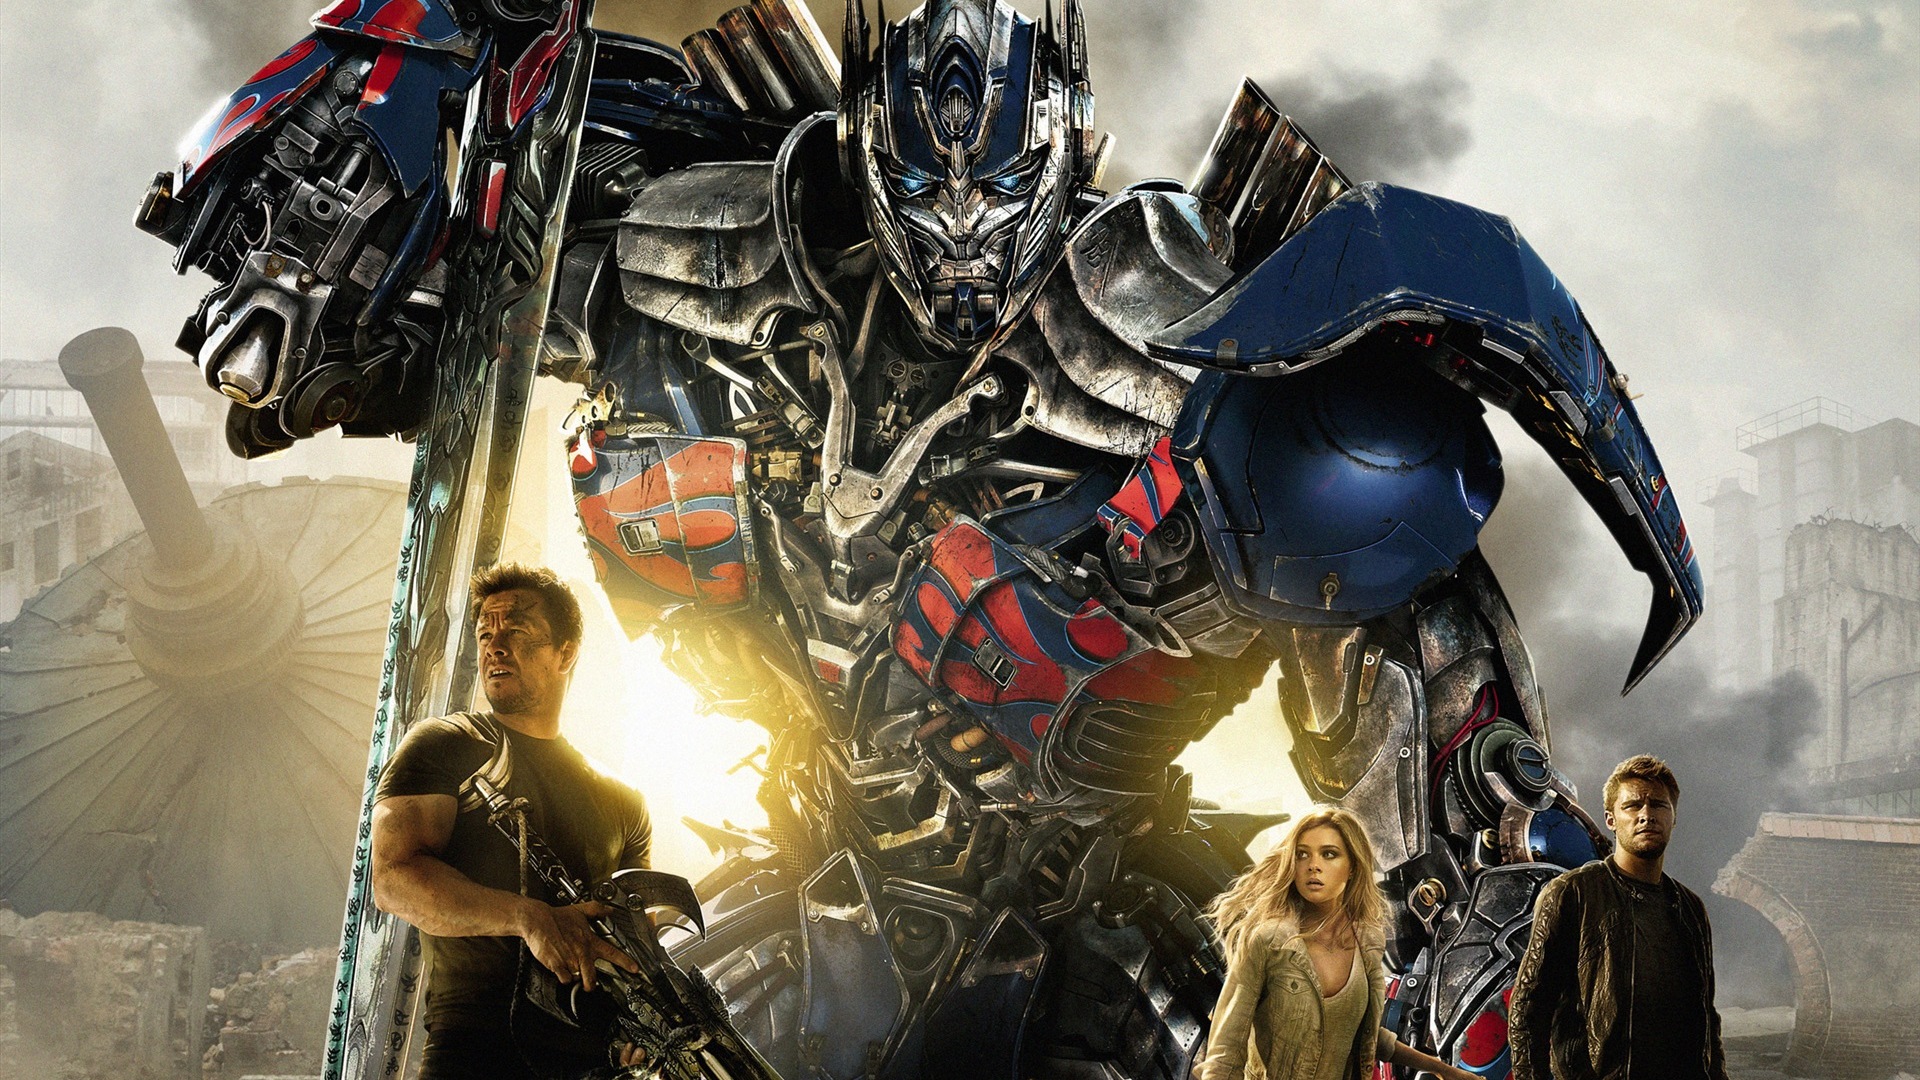 2014 Transformers: Age of Extinction HD tapety #1 - 1920x1080